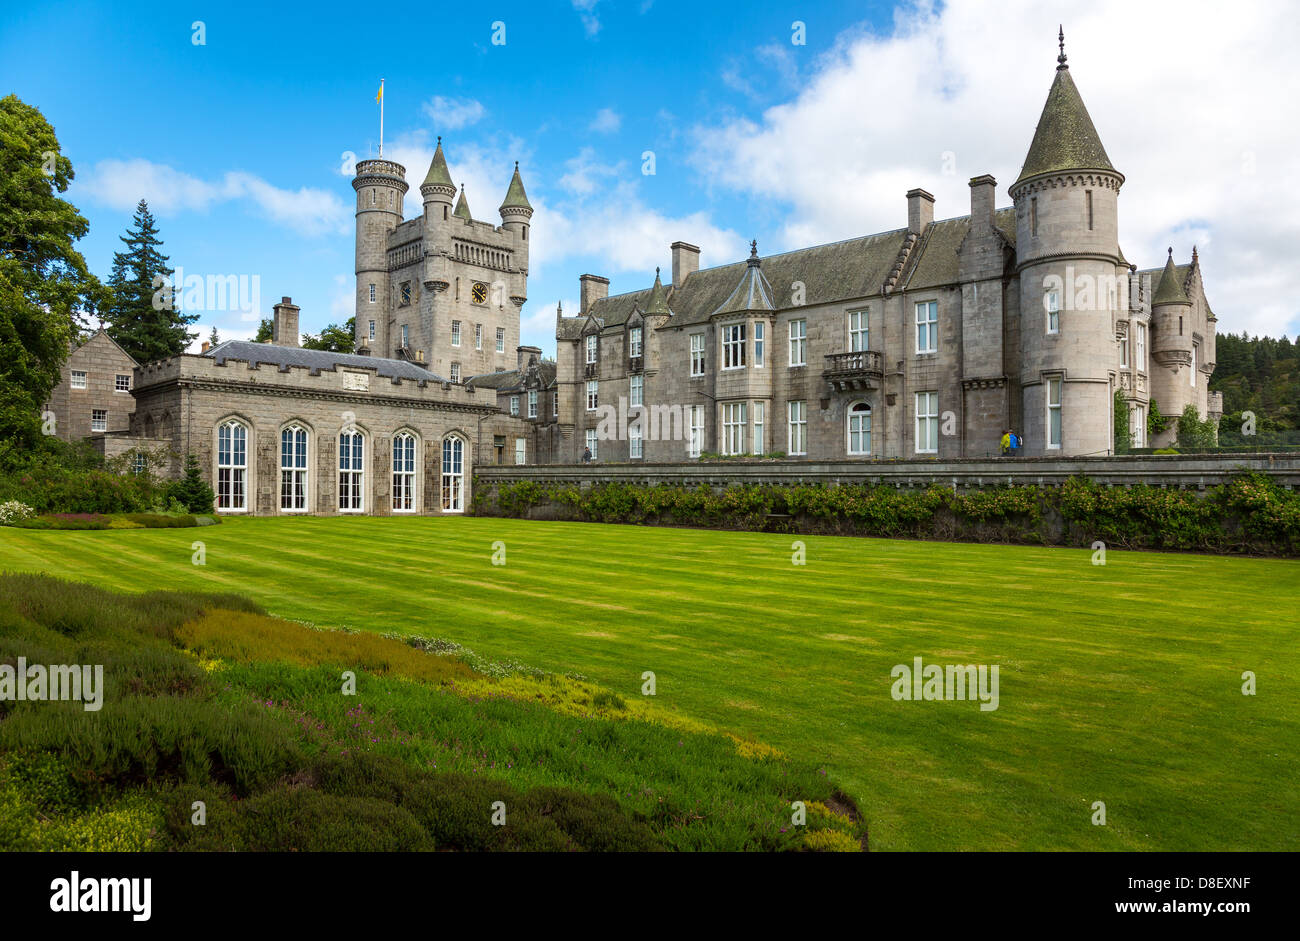 Great Britain, Scotland, Aberdeenshire, the Balmoral castle, summer residence of the British Royal Family. Stock Photo